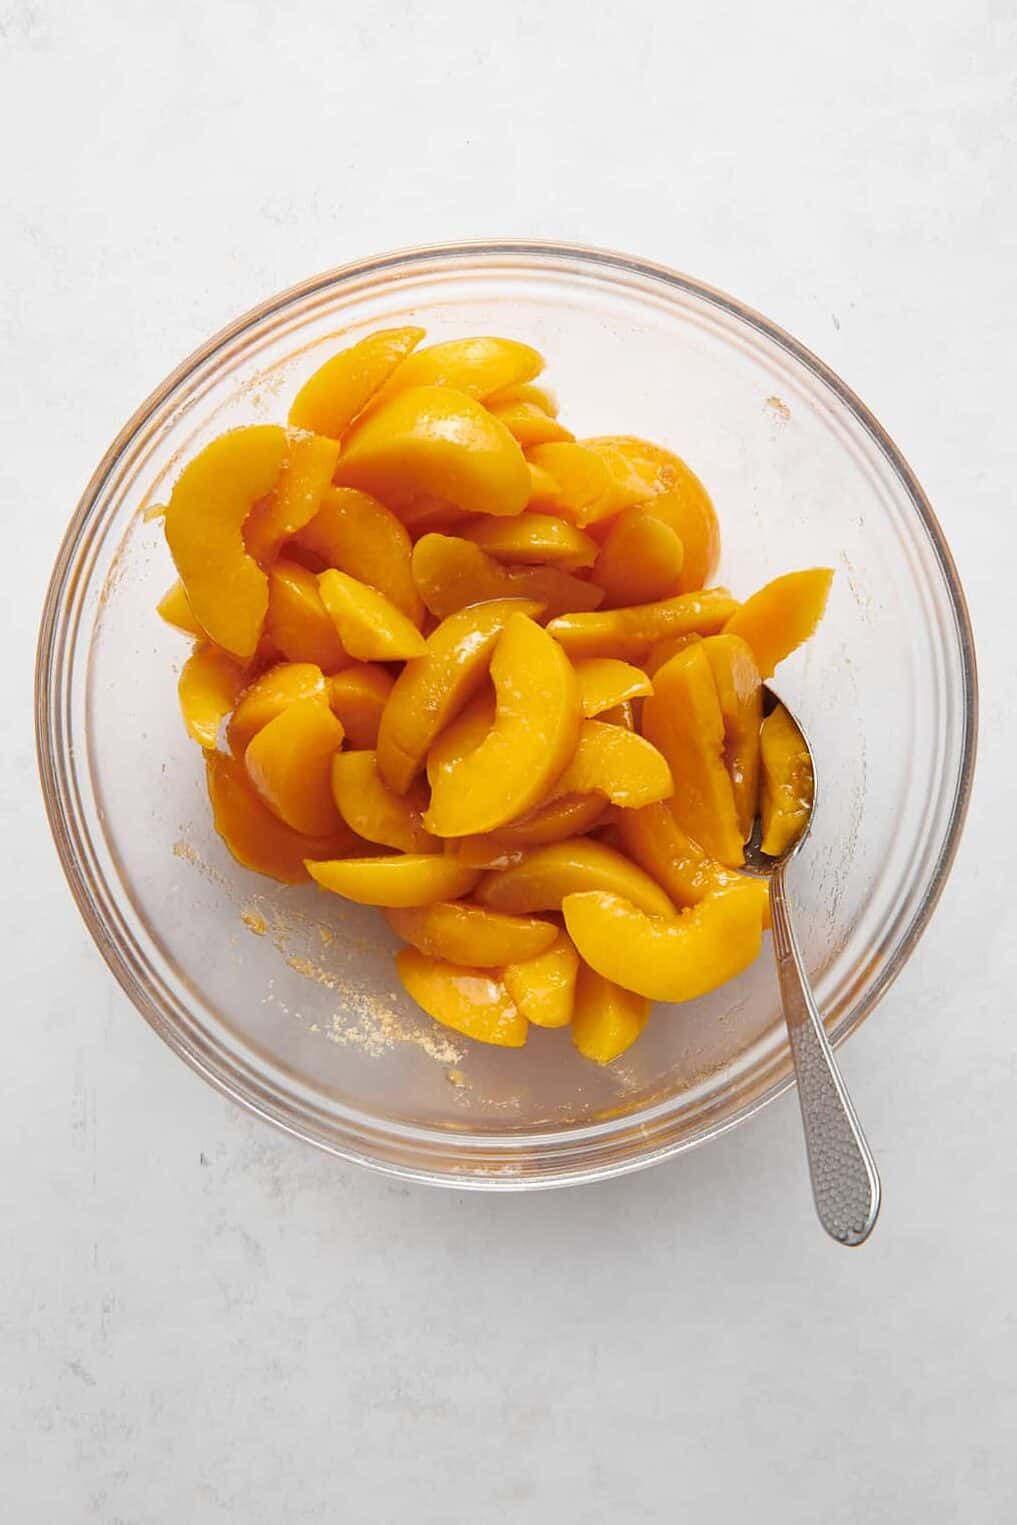 canned sliced peaches in a clear glass bowl